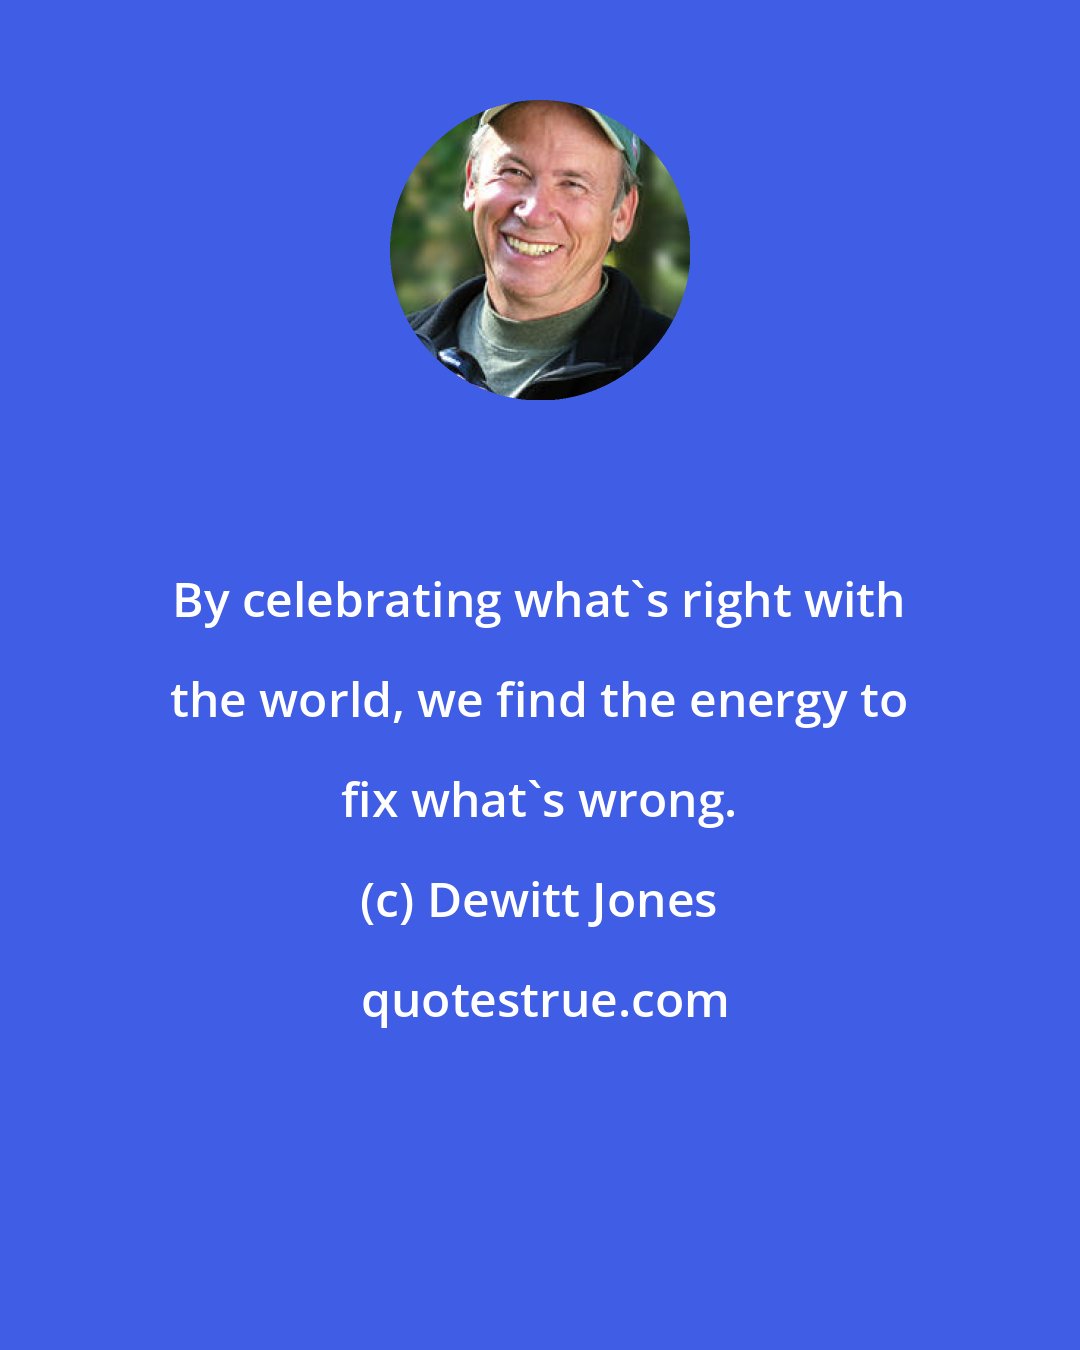 Dewitt Jones: By celebrating what's right with the world, we find the energy to fix what's wrong.